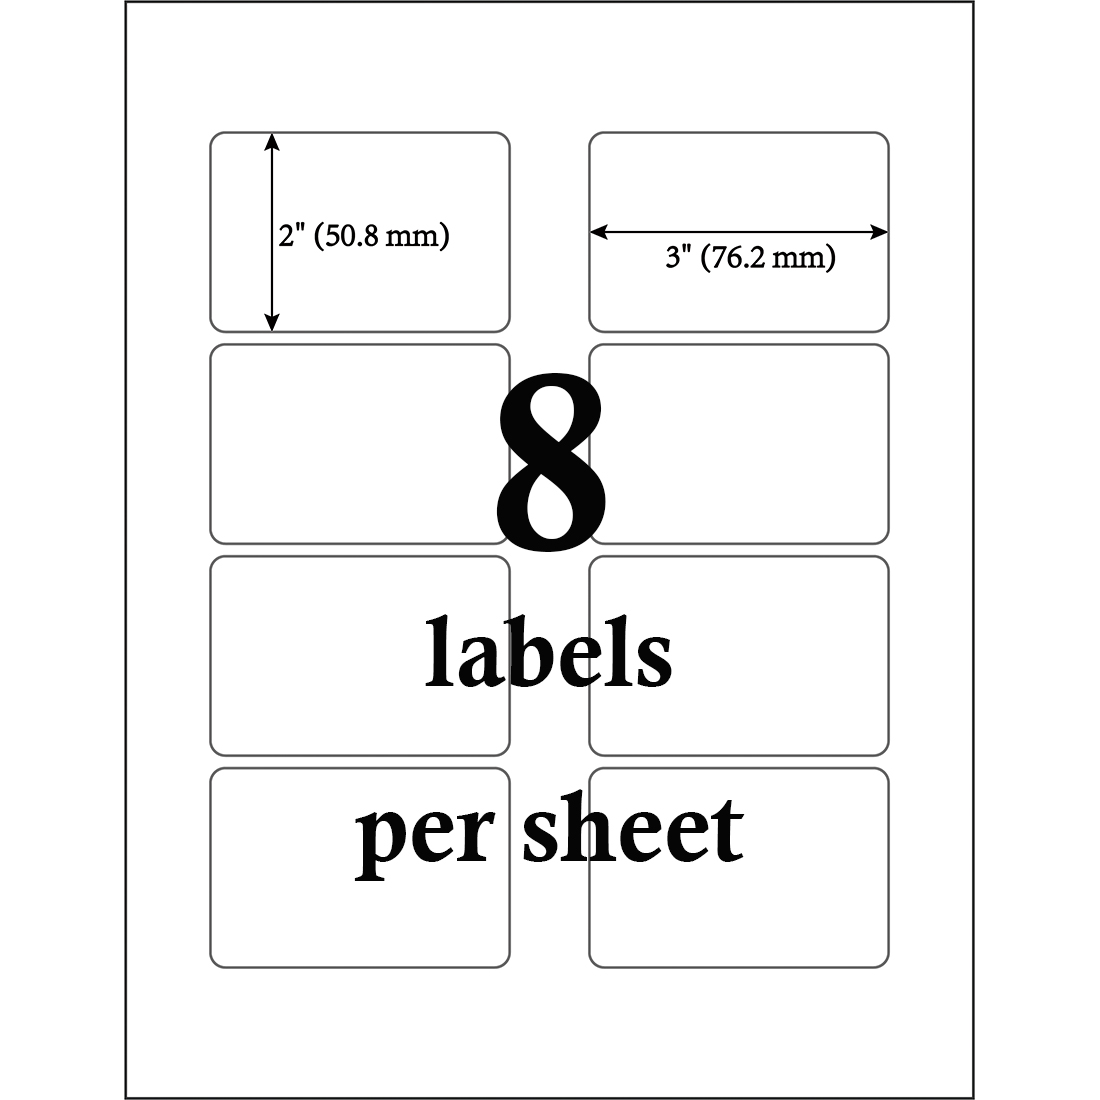 Mr. Know Face Stickers - 10 Sheets – Thermal Labels Xtra